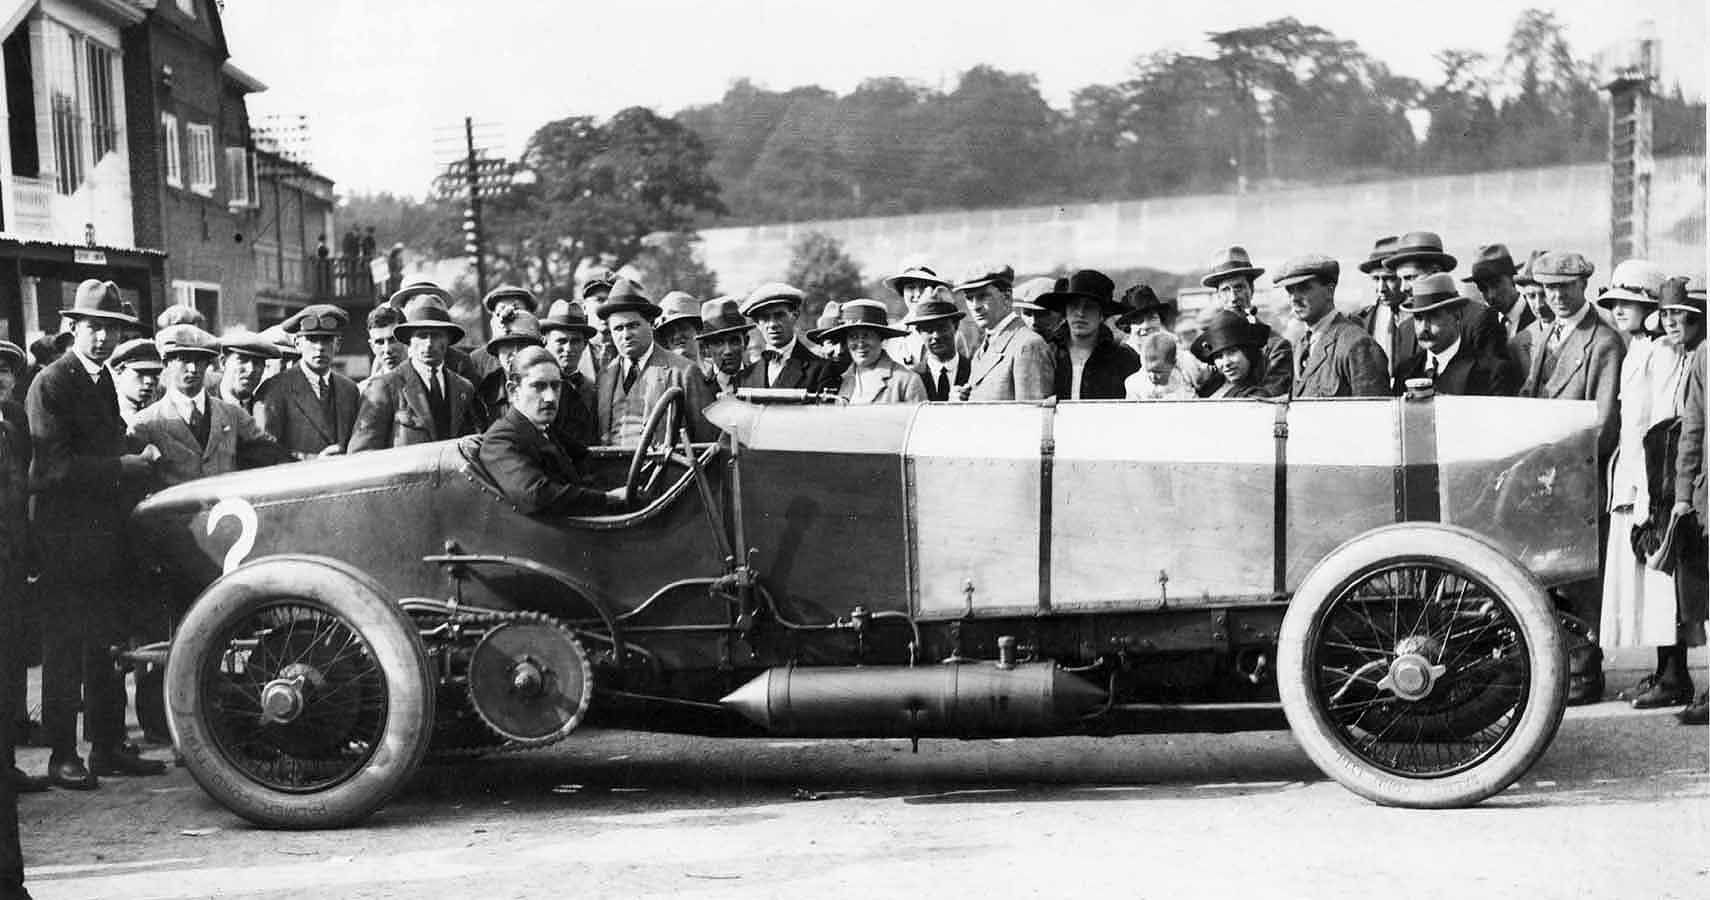 Count Louis Zborowski With Chitty Chitty Bang Bang 1 At Brooklands Racing Circuit In Early '20s